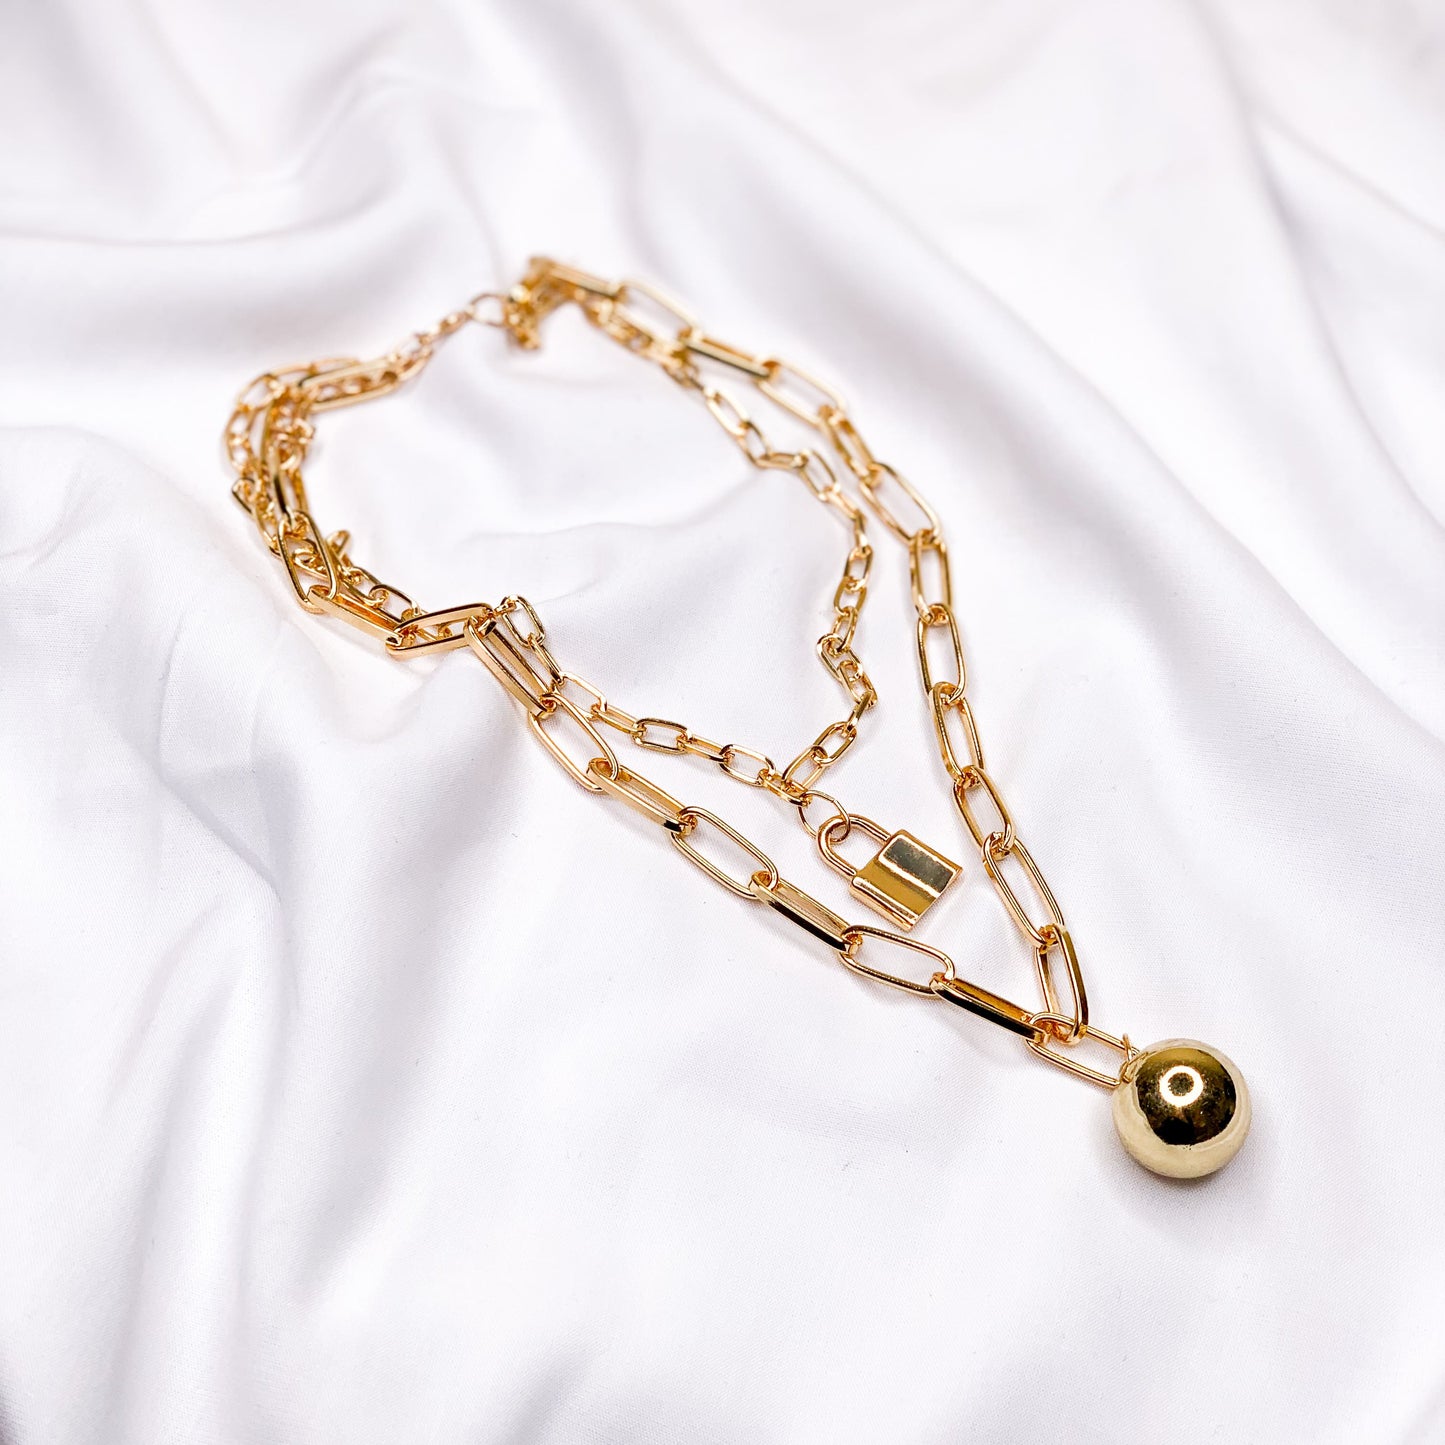 Chain necklace with ball and lock pendant